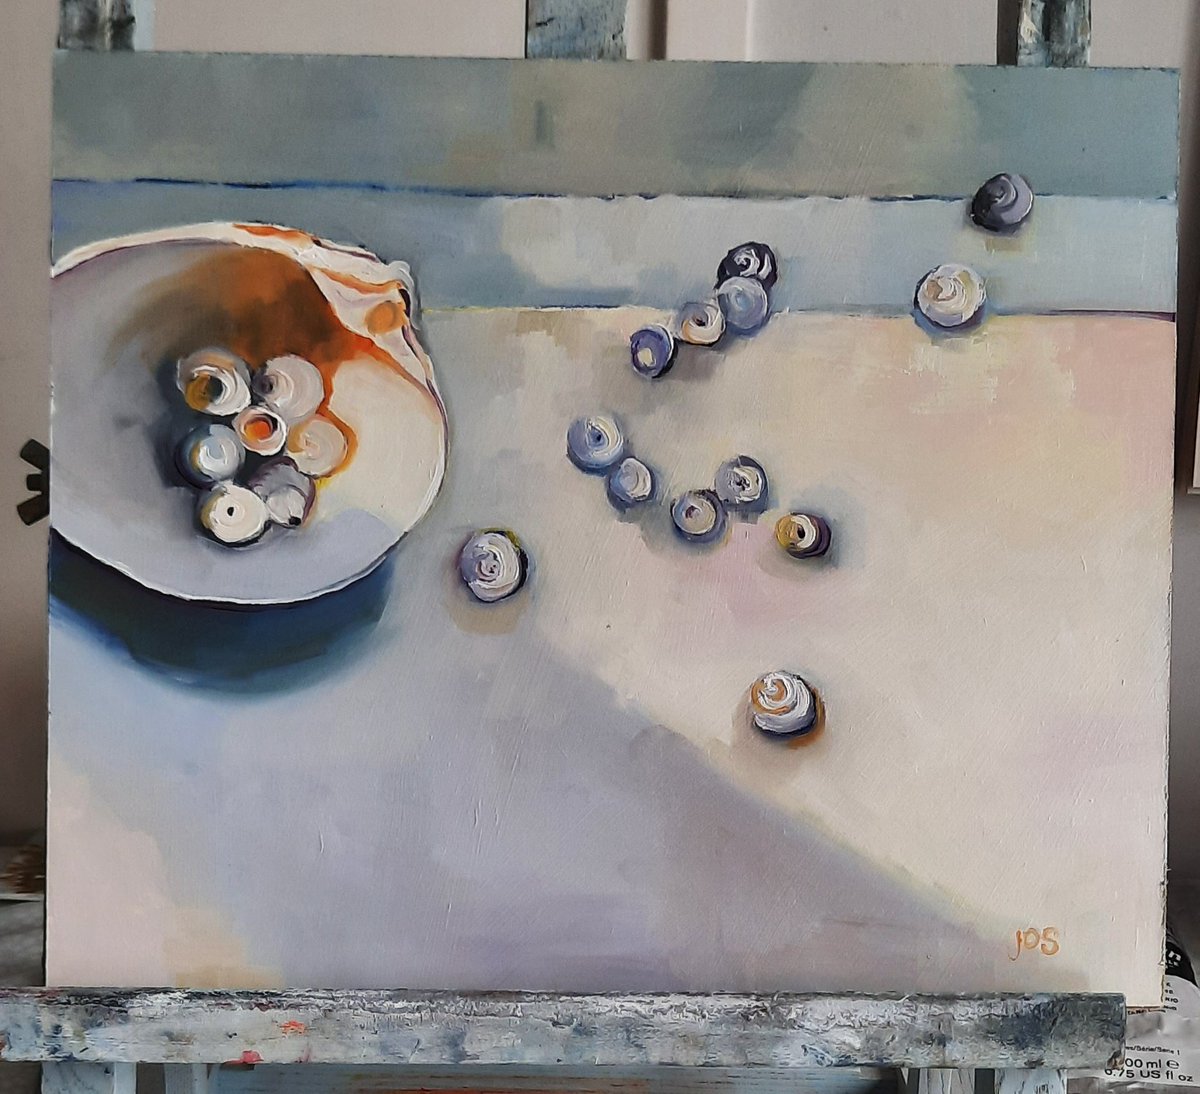 Giving myself much needed space within my paintings, they're still shell collections, and I'm still looking at sunlight. How do you develop your work?
#welshart #shellcollector #stilllife #womensart #contemporarystilllife #artcollector #fineart